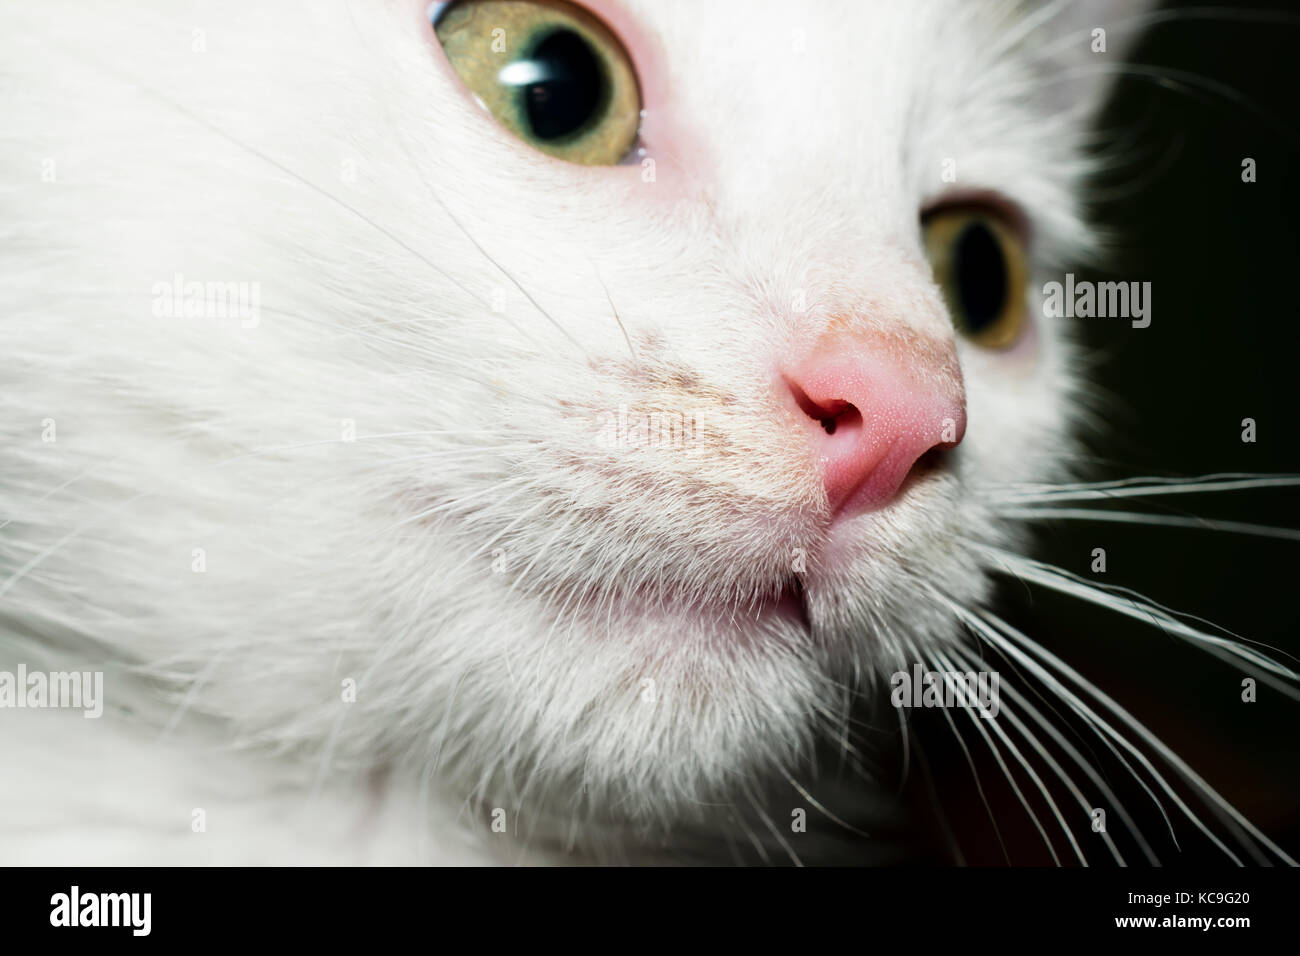 Side View Portrait Of Beautiful Young White Kitten Looking Away From The Camera Stock Photo